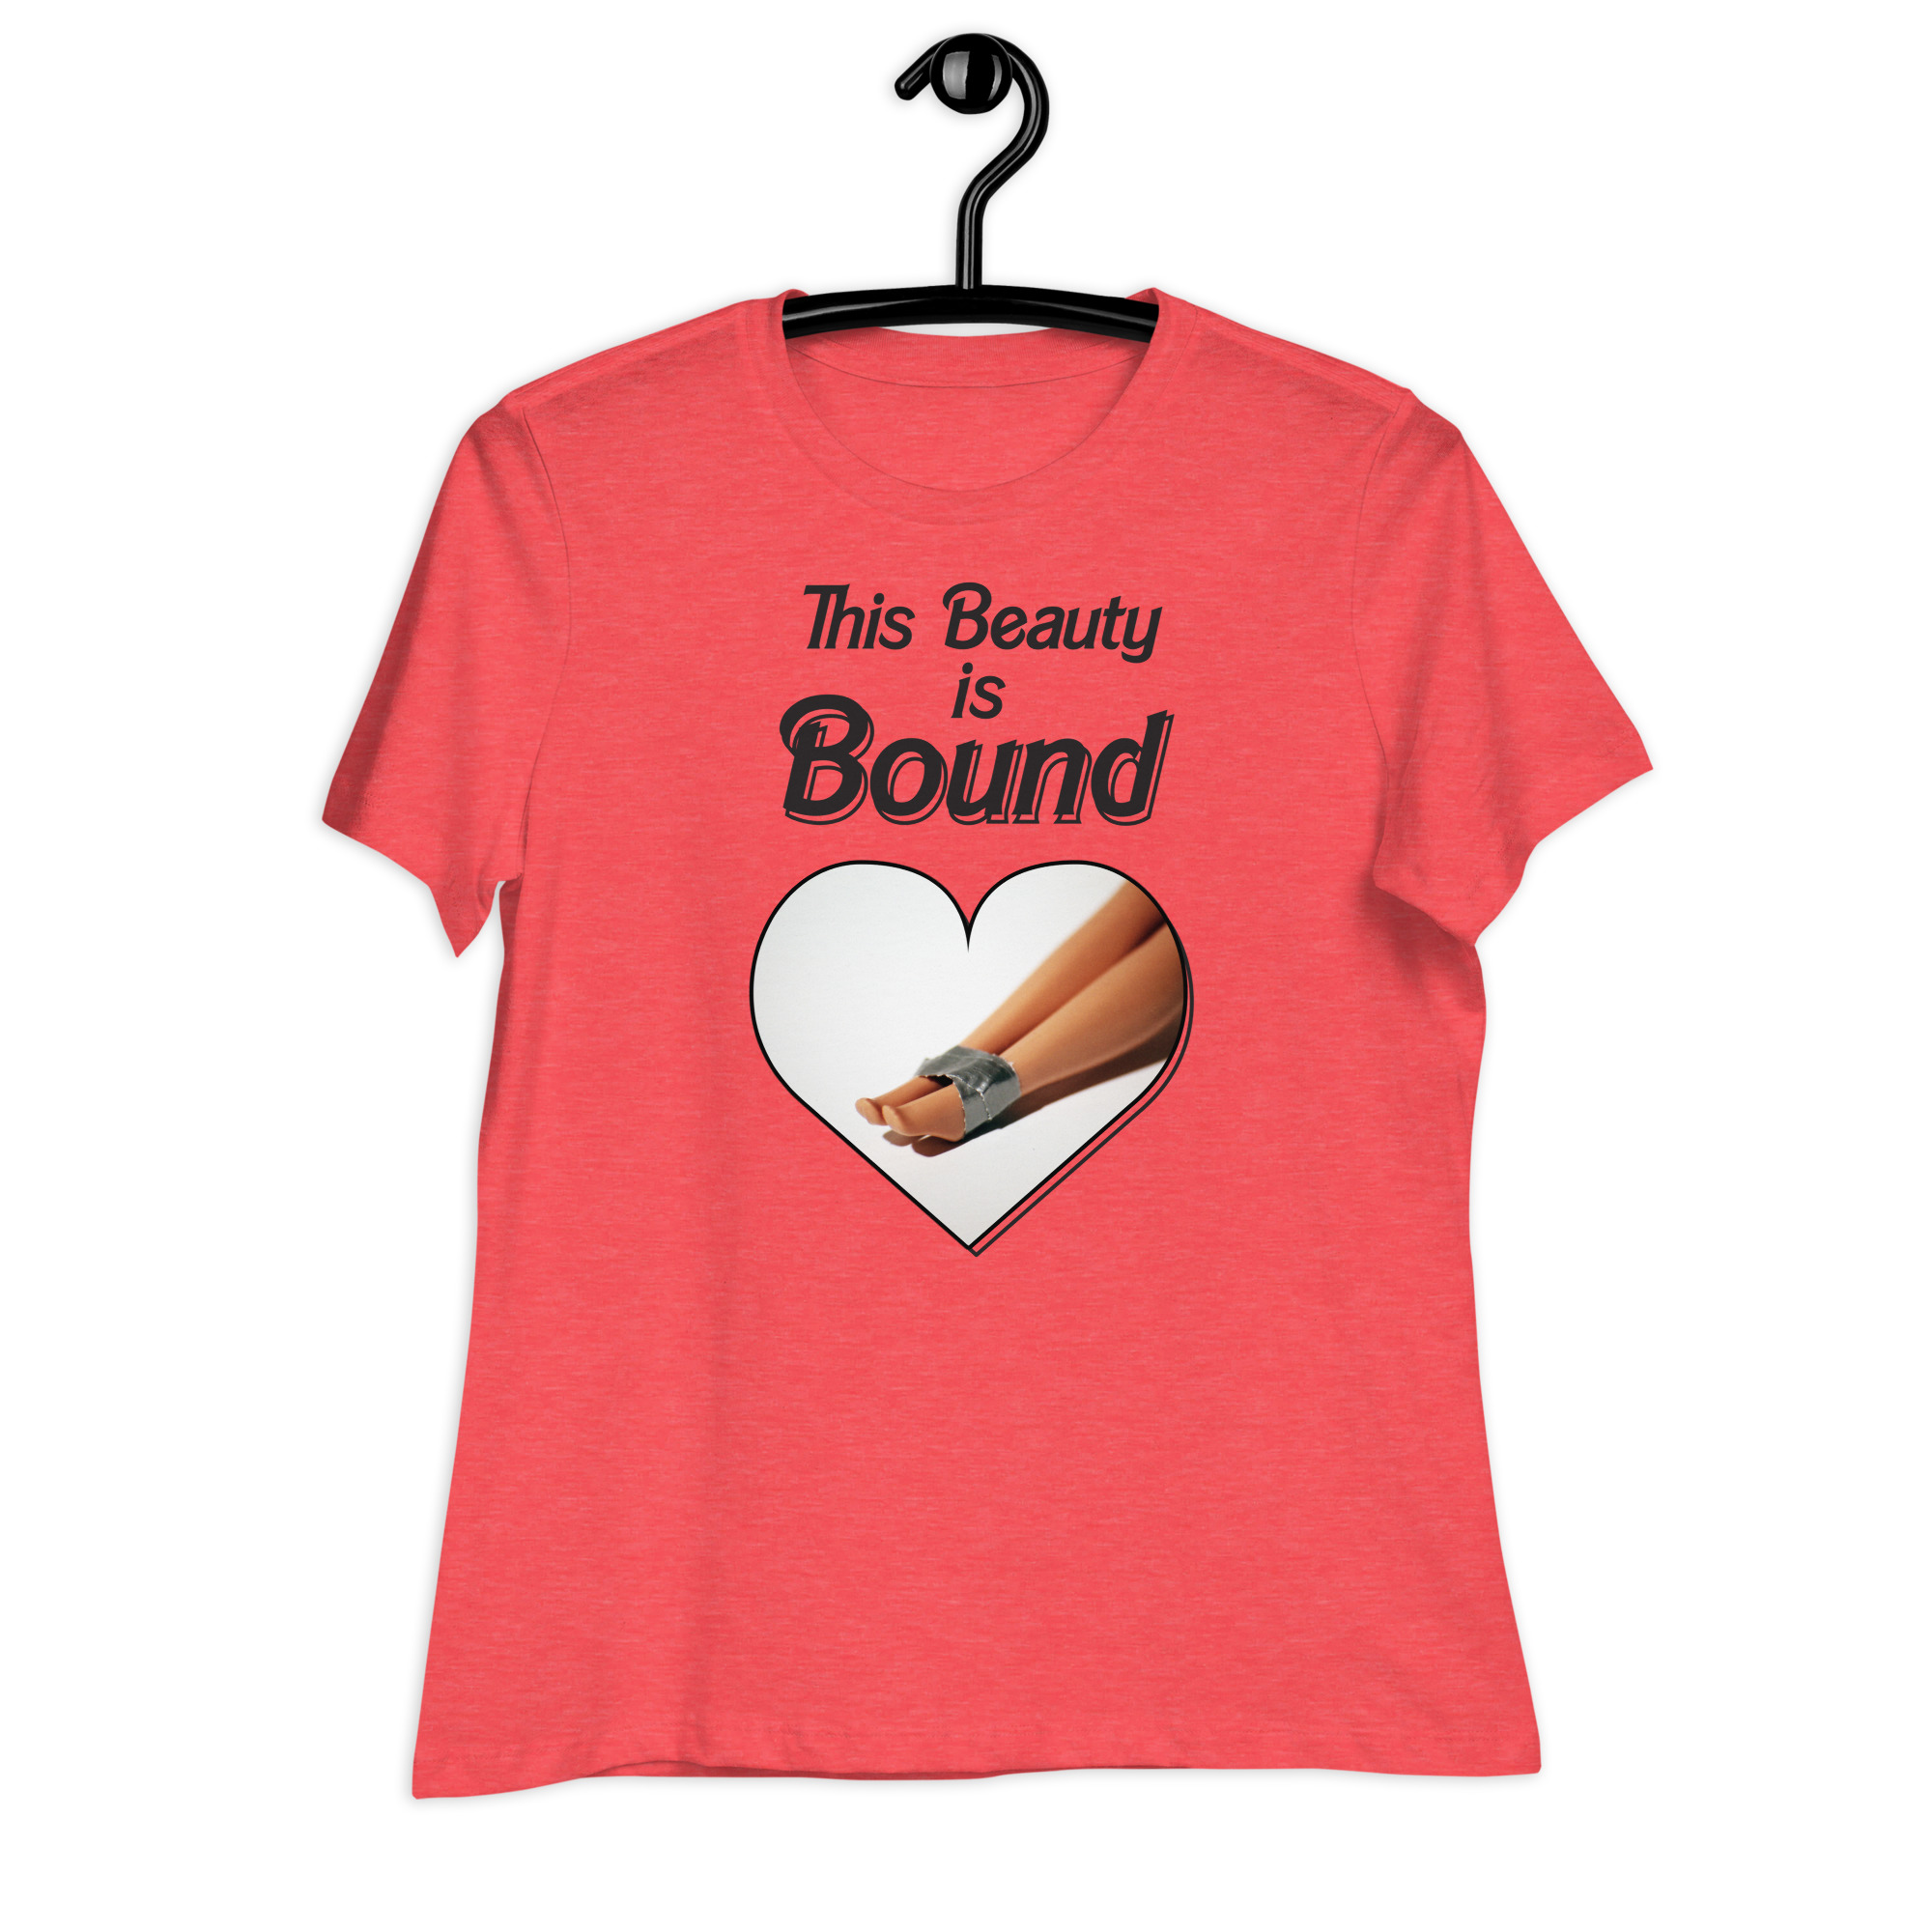 This Beauty is Bound Tshirt by Wilde Designs